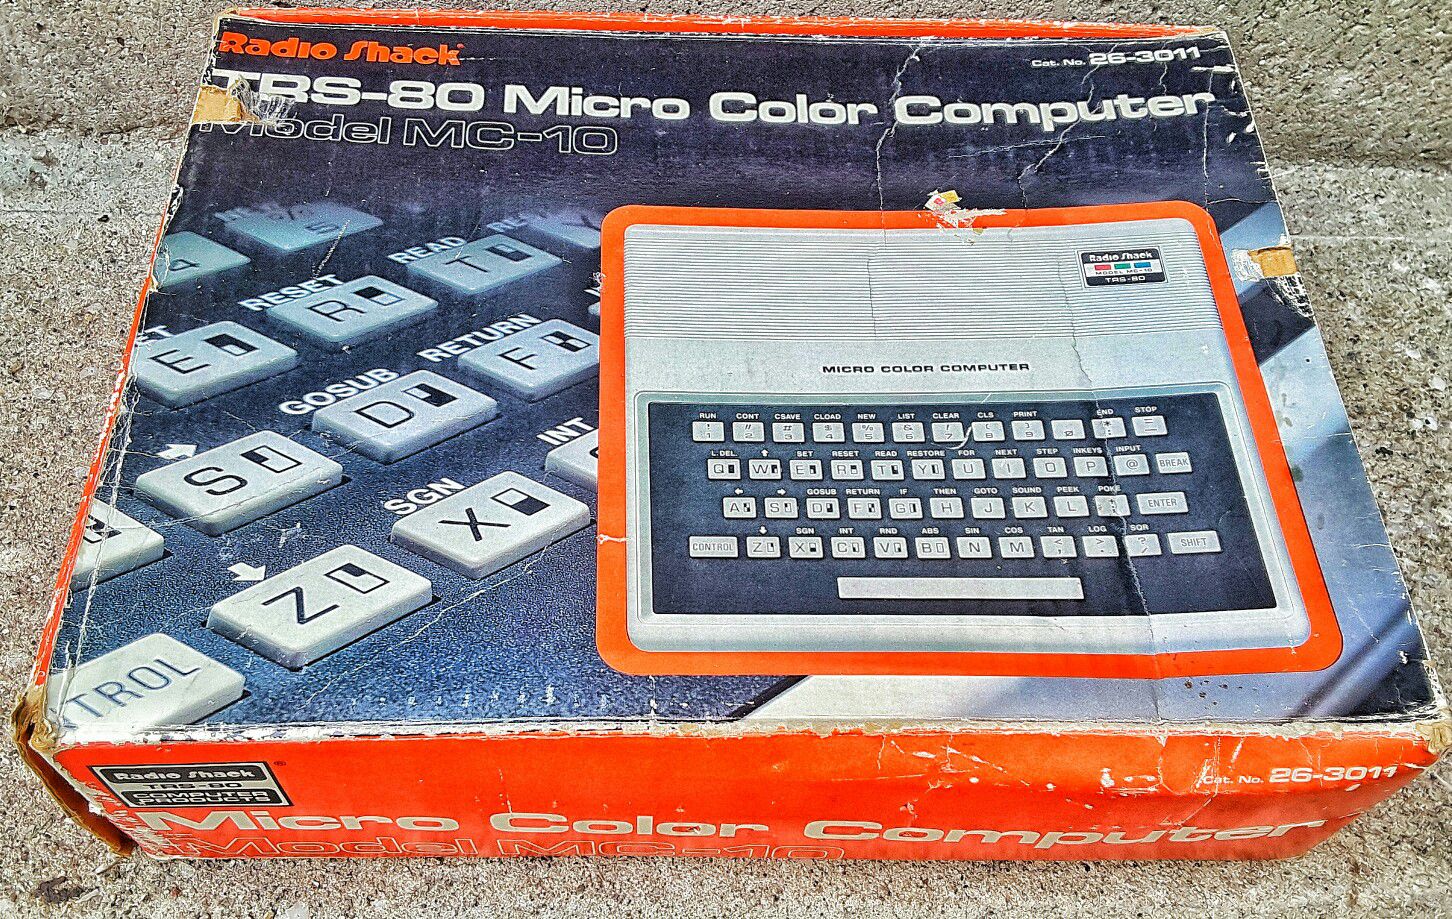 Vintage TRS-80 radio shack computer 1983 Era micro computer or video game console